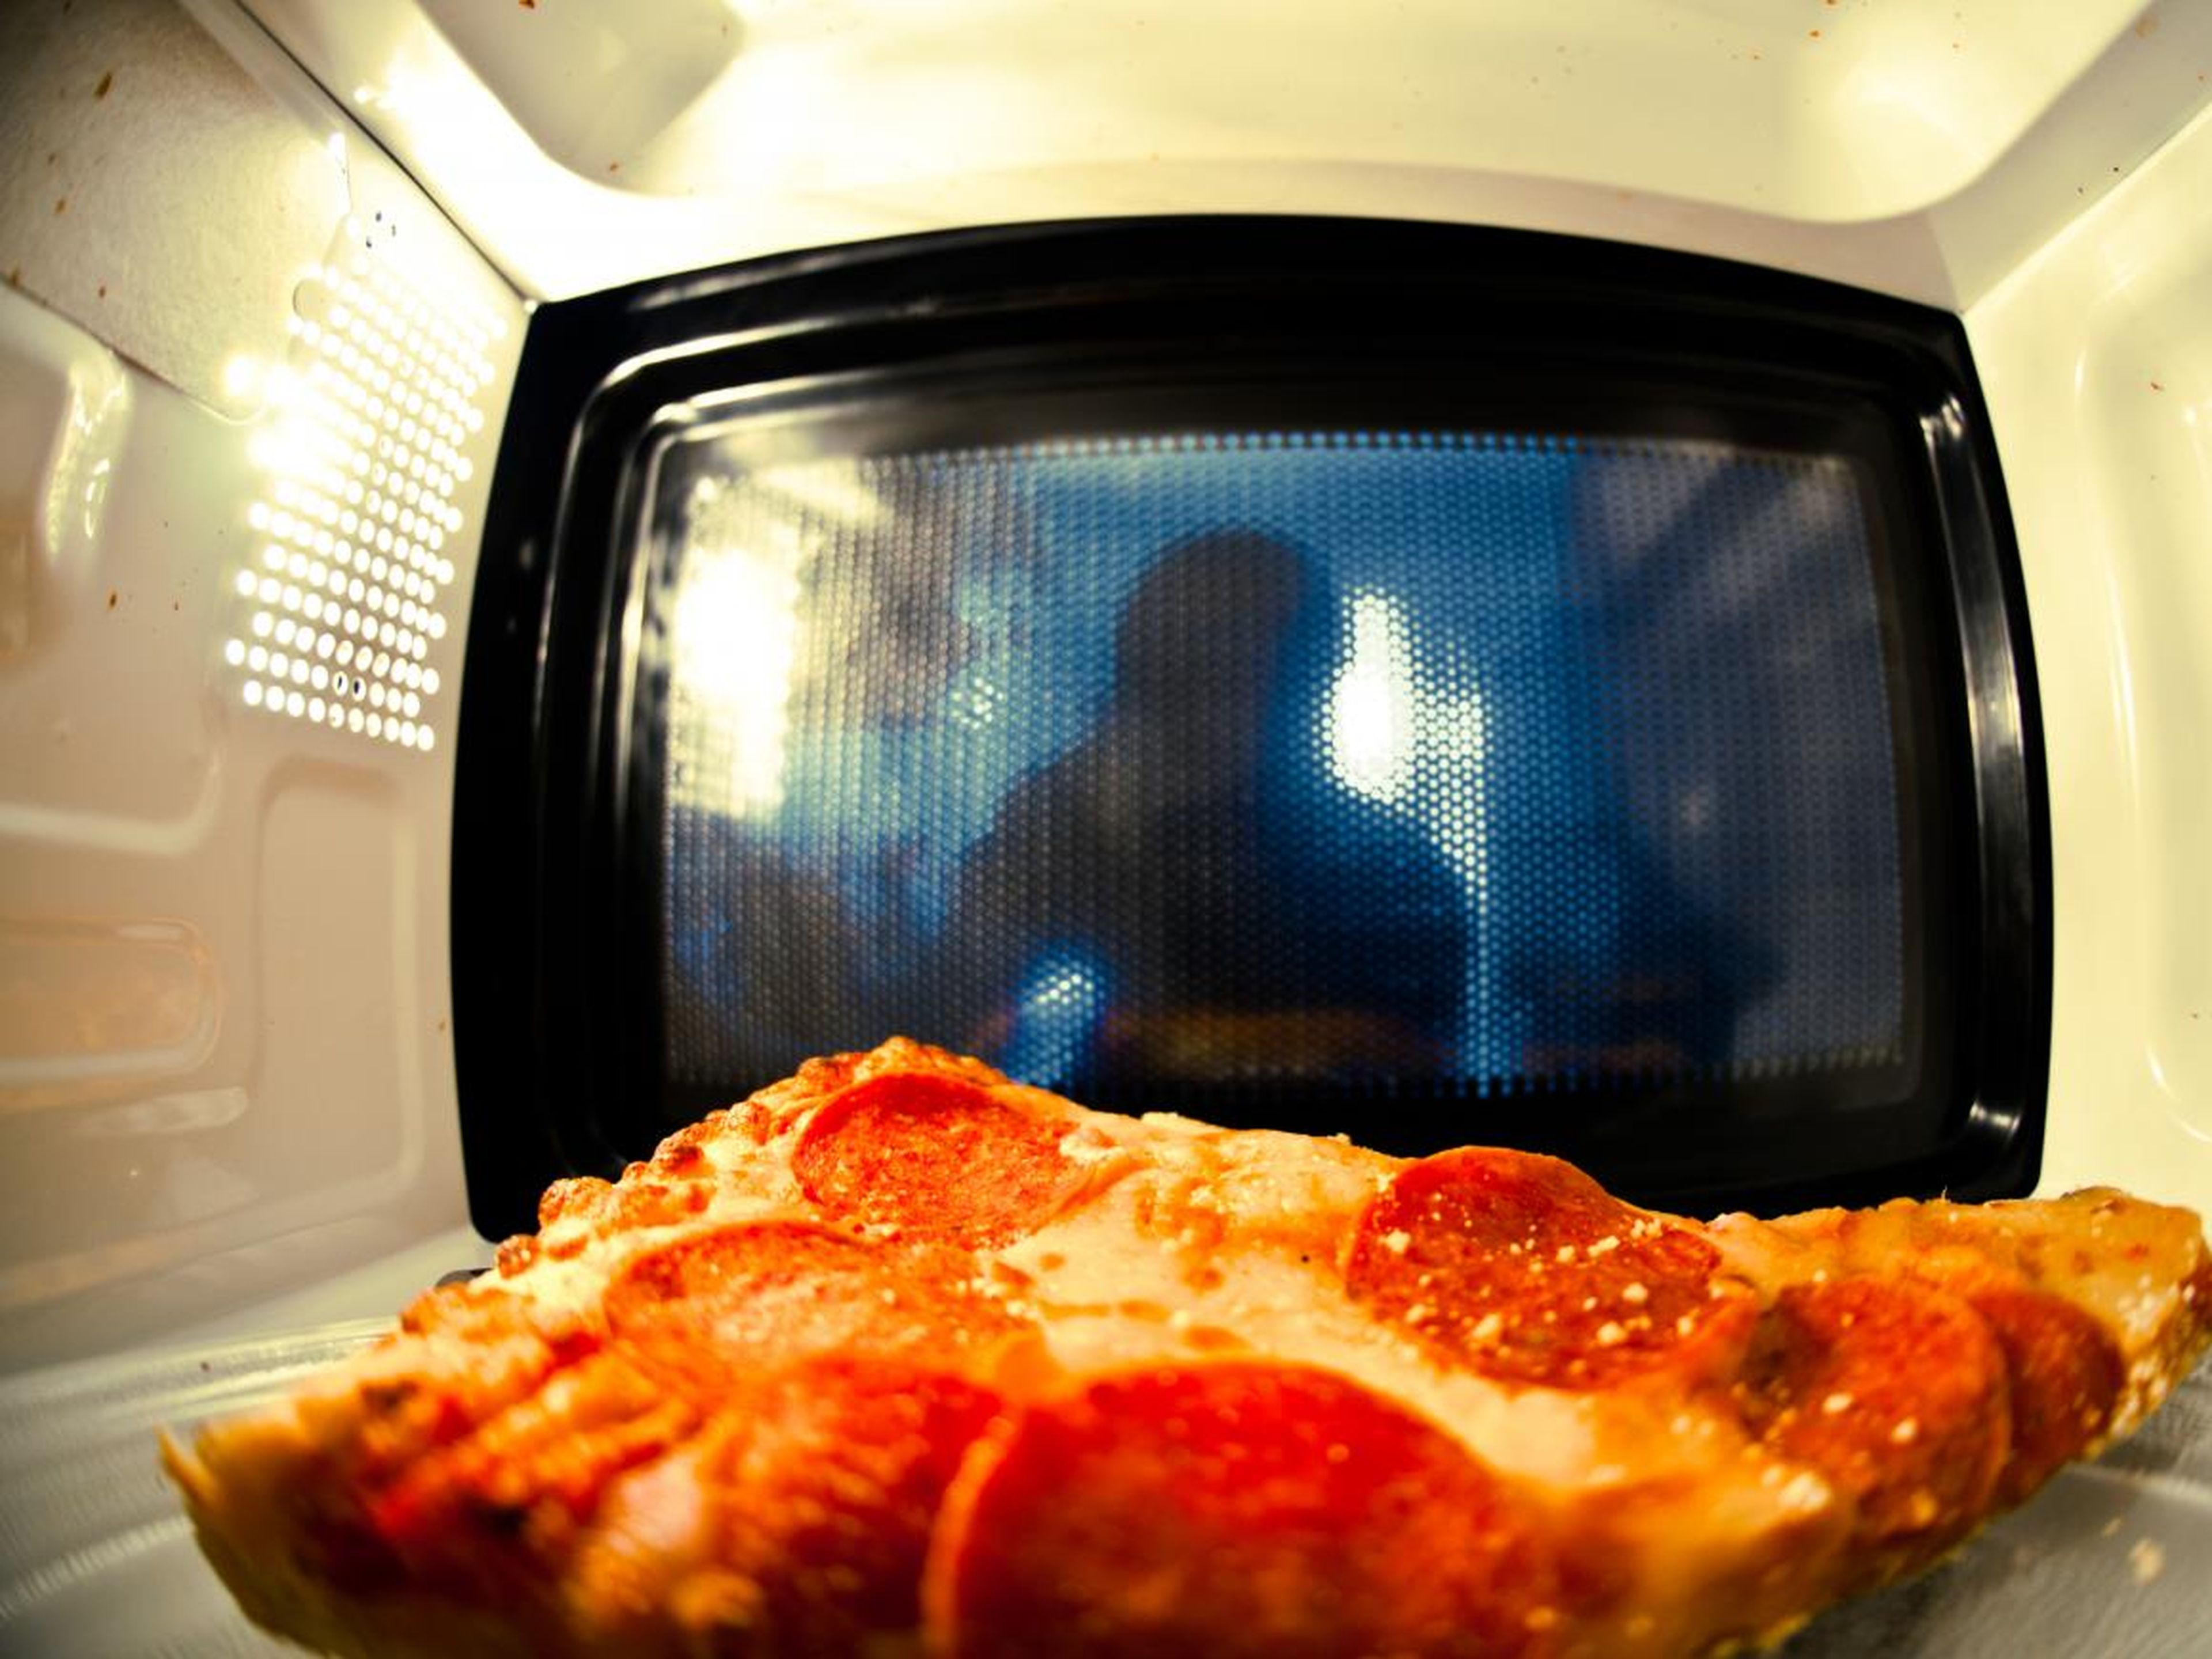 Your pizza will lose its crunch in the microwave.